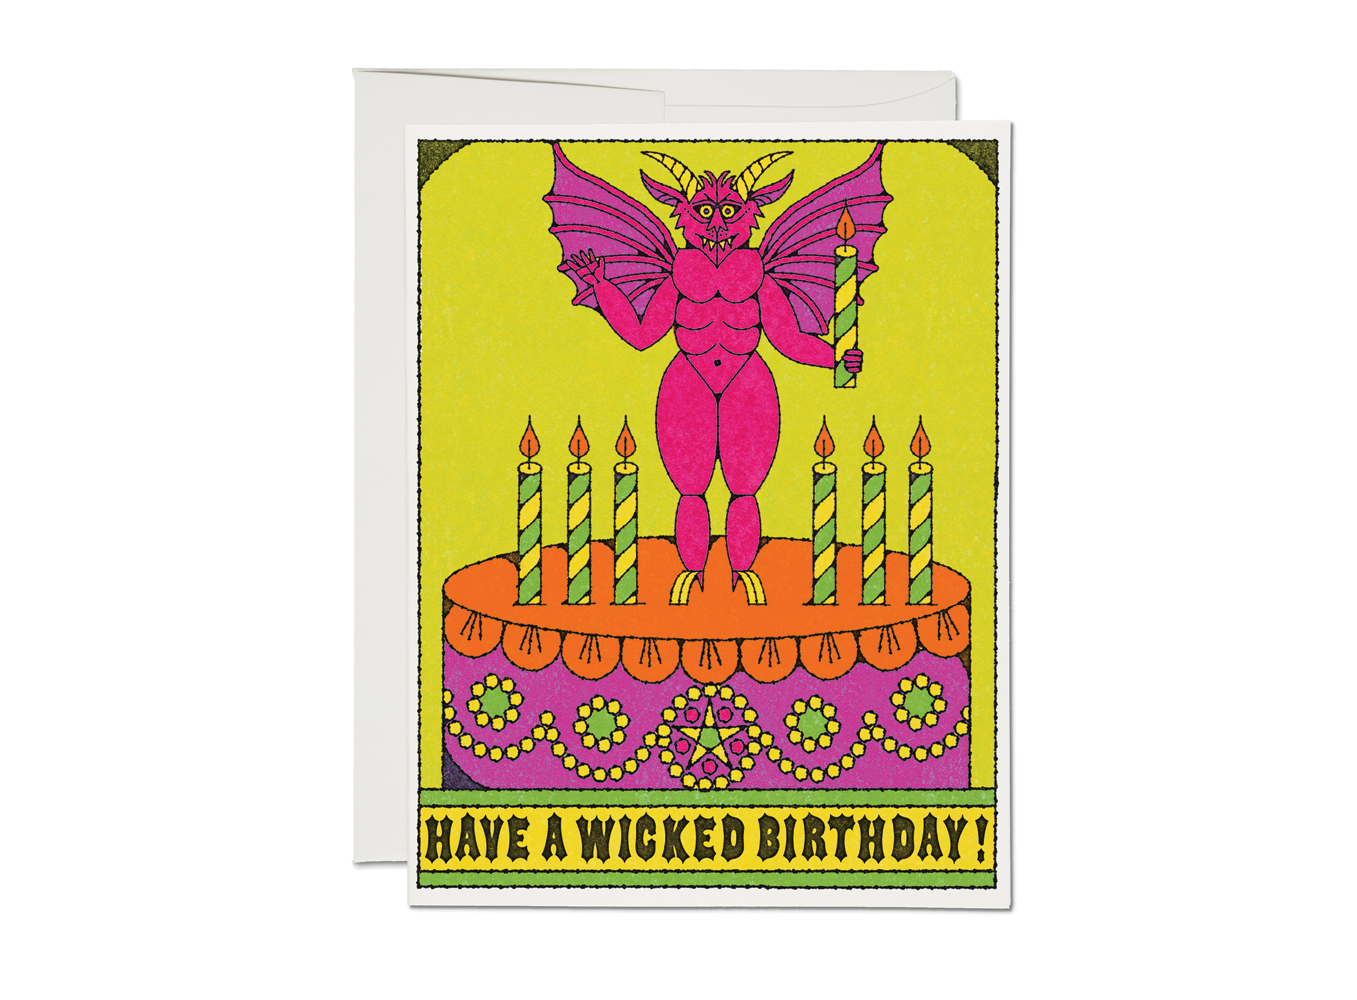 Wicked Birthday - Greeting Card